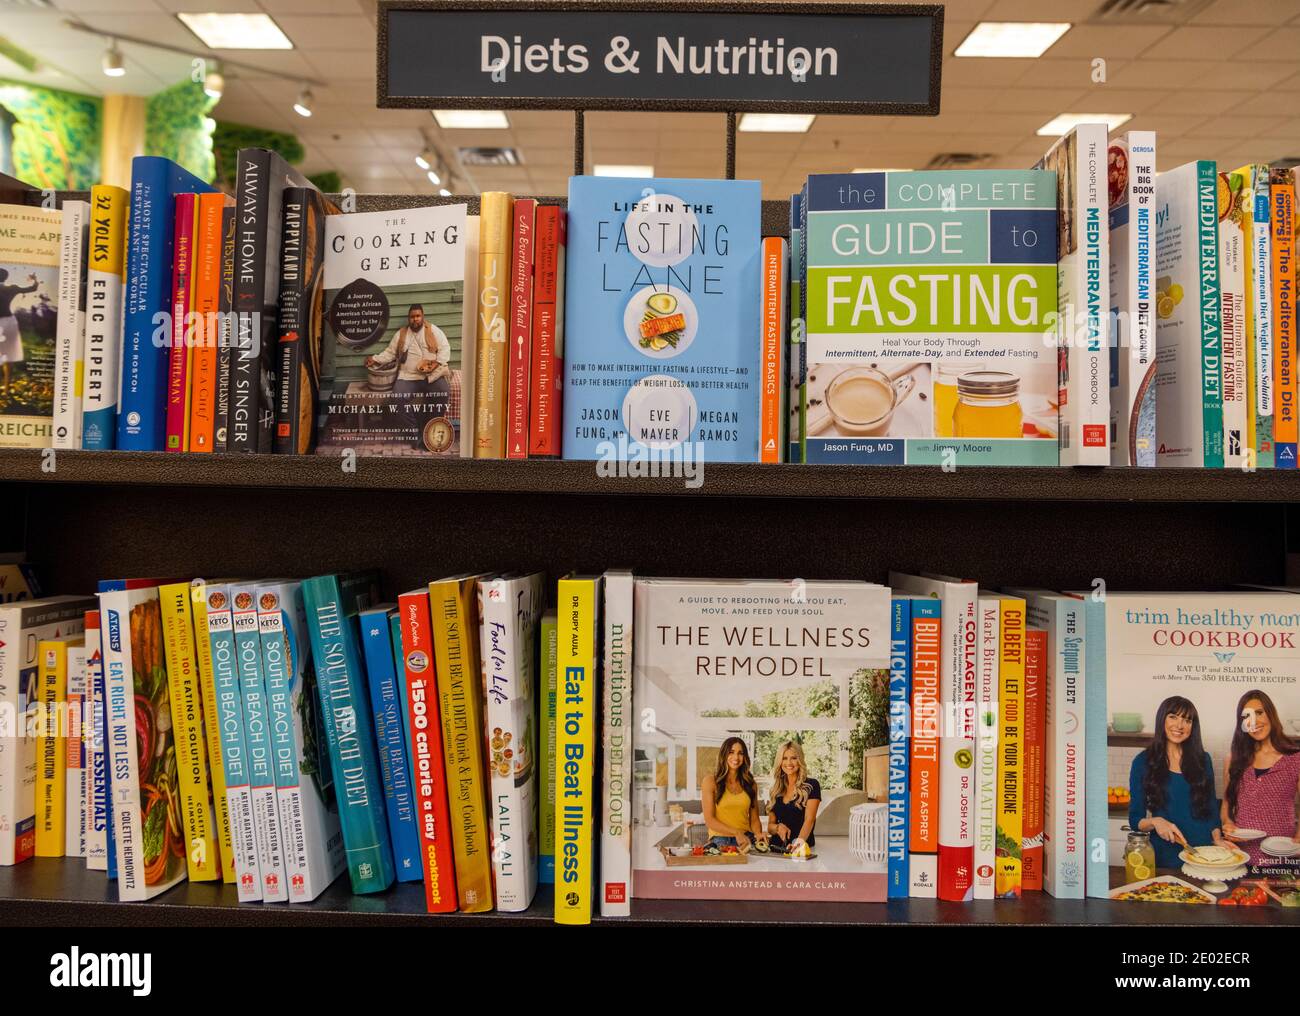 diets and nutrition books on shelves, Barnes and Noble, USA Stock Photo